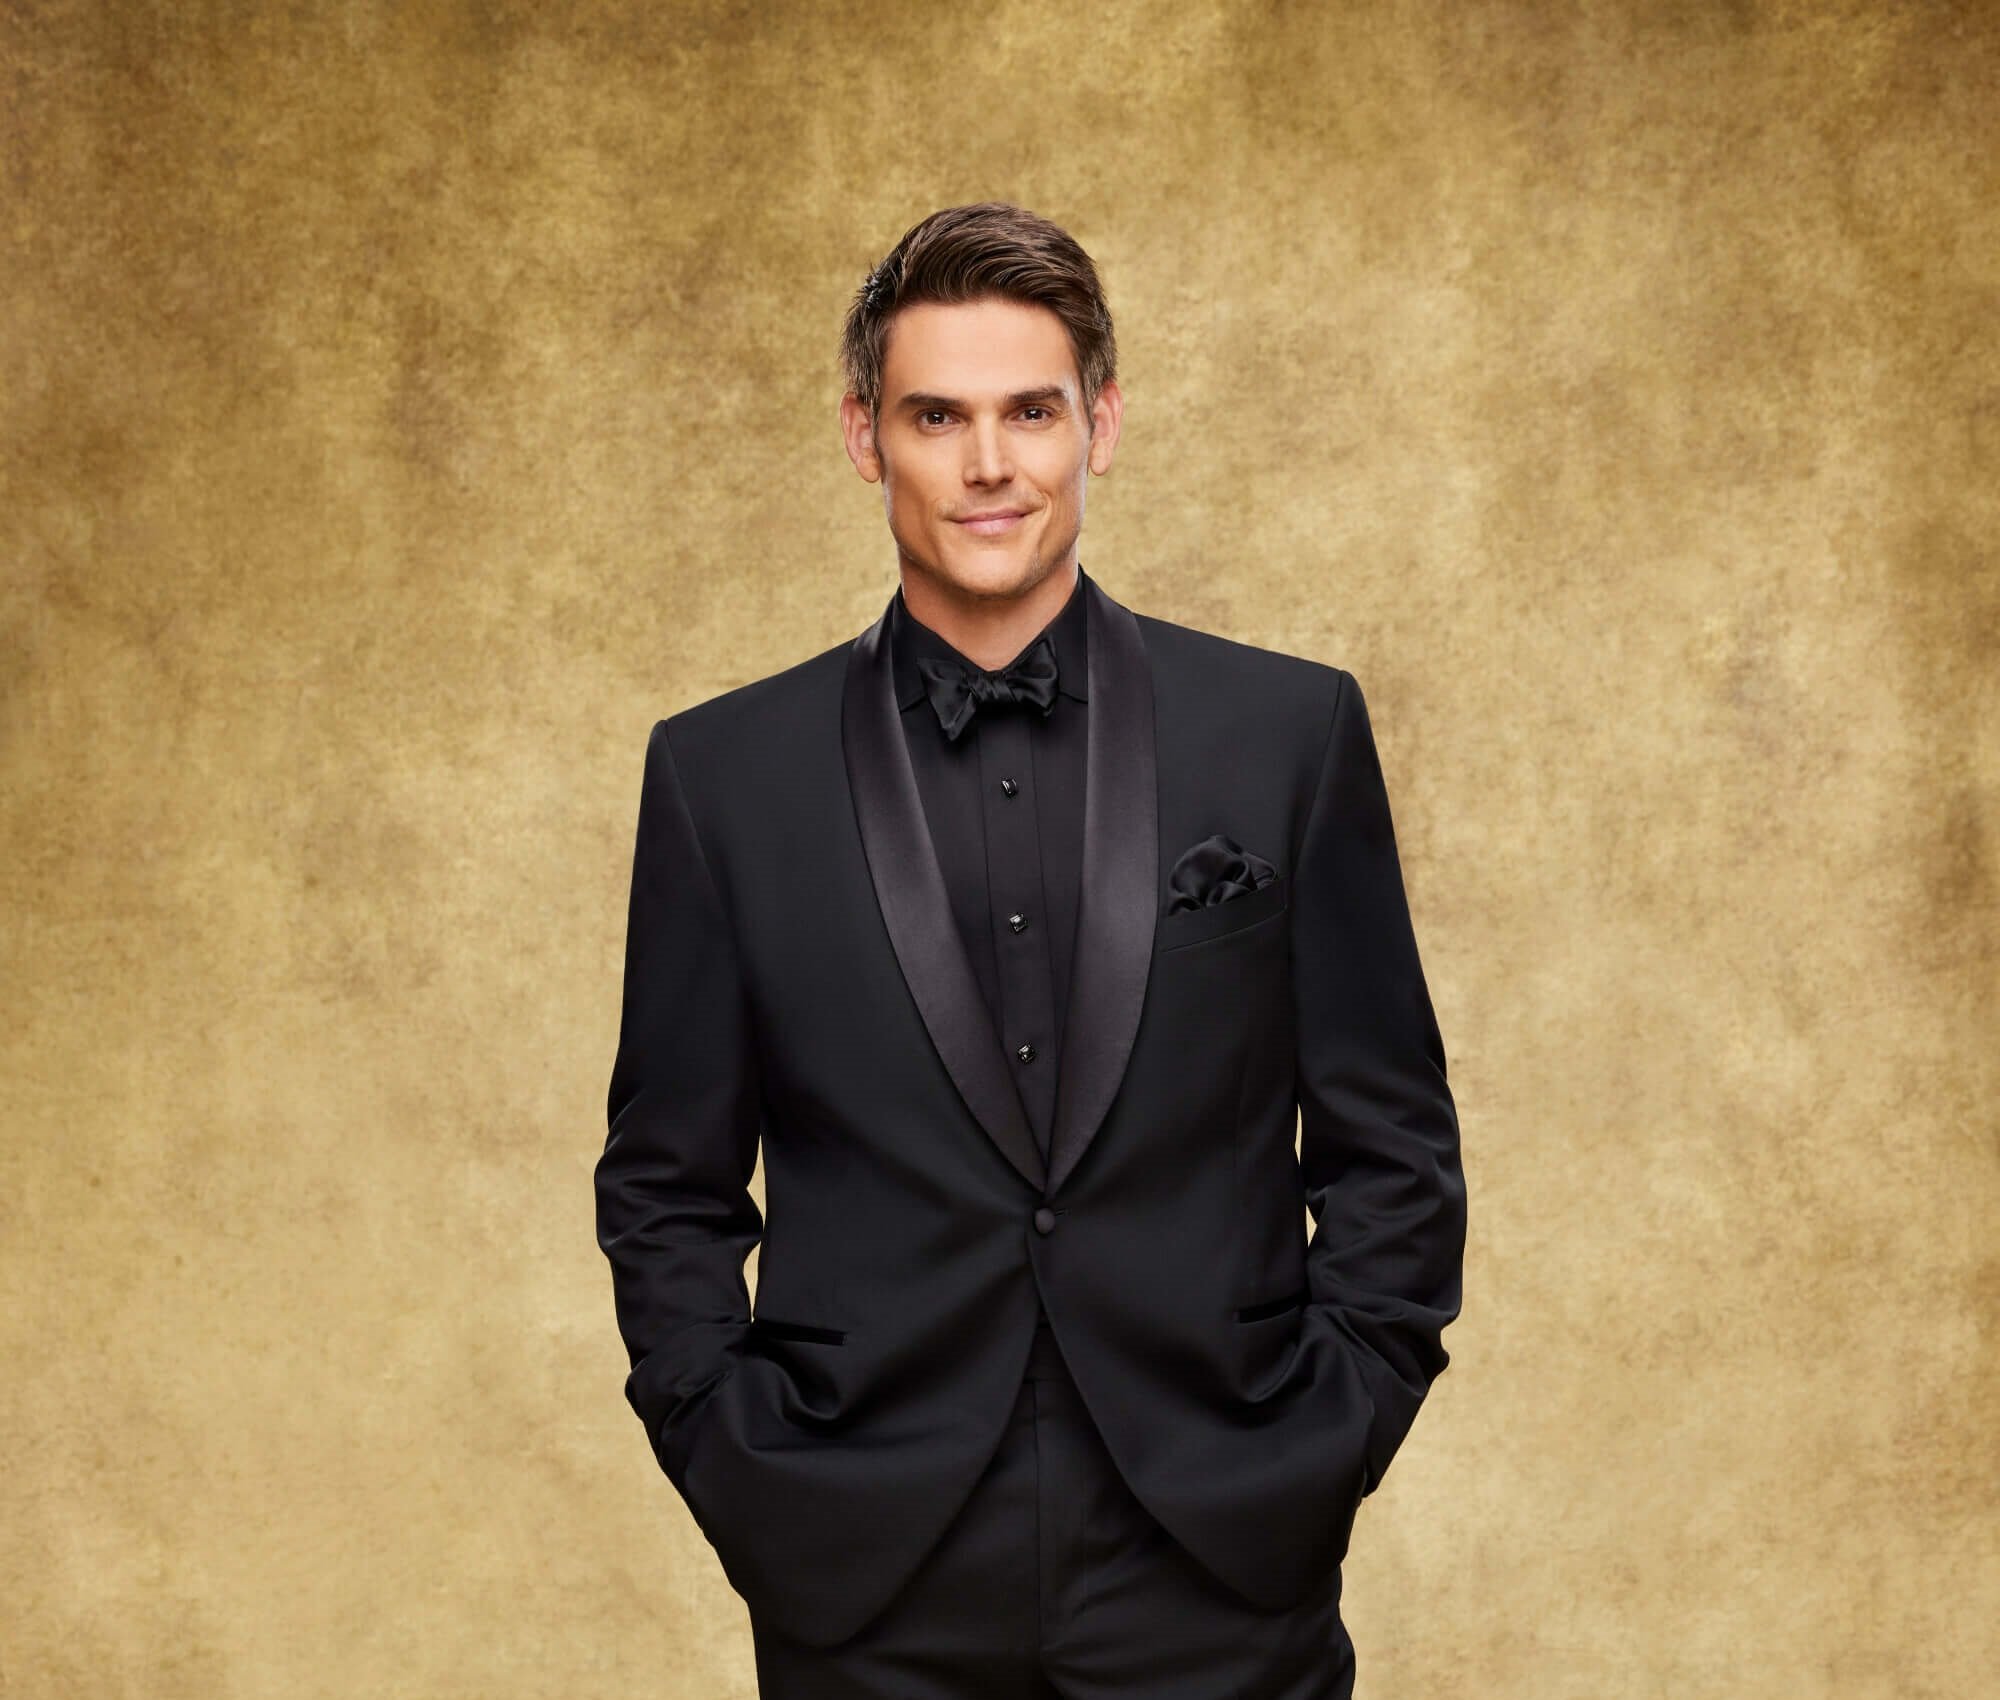 'The Young and the Restless' star Mark Grossman dressed in a black suit; posing in front of a gold backdrop.